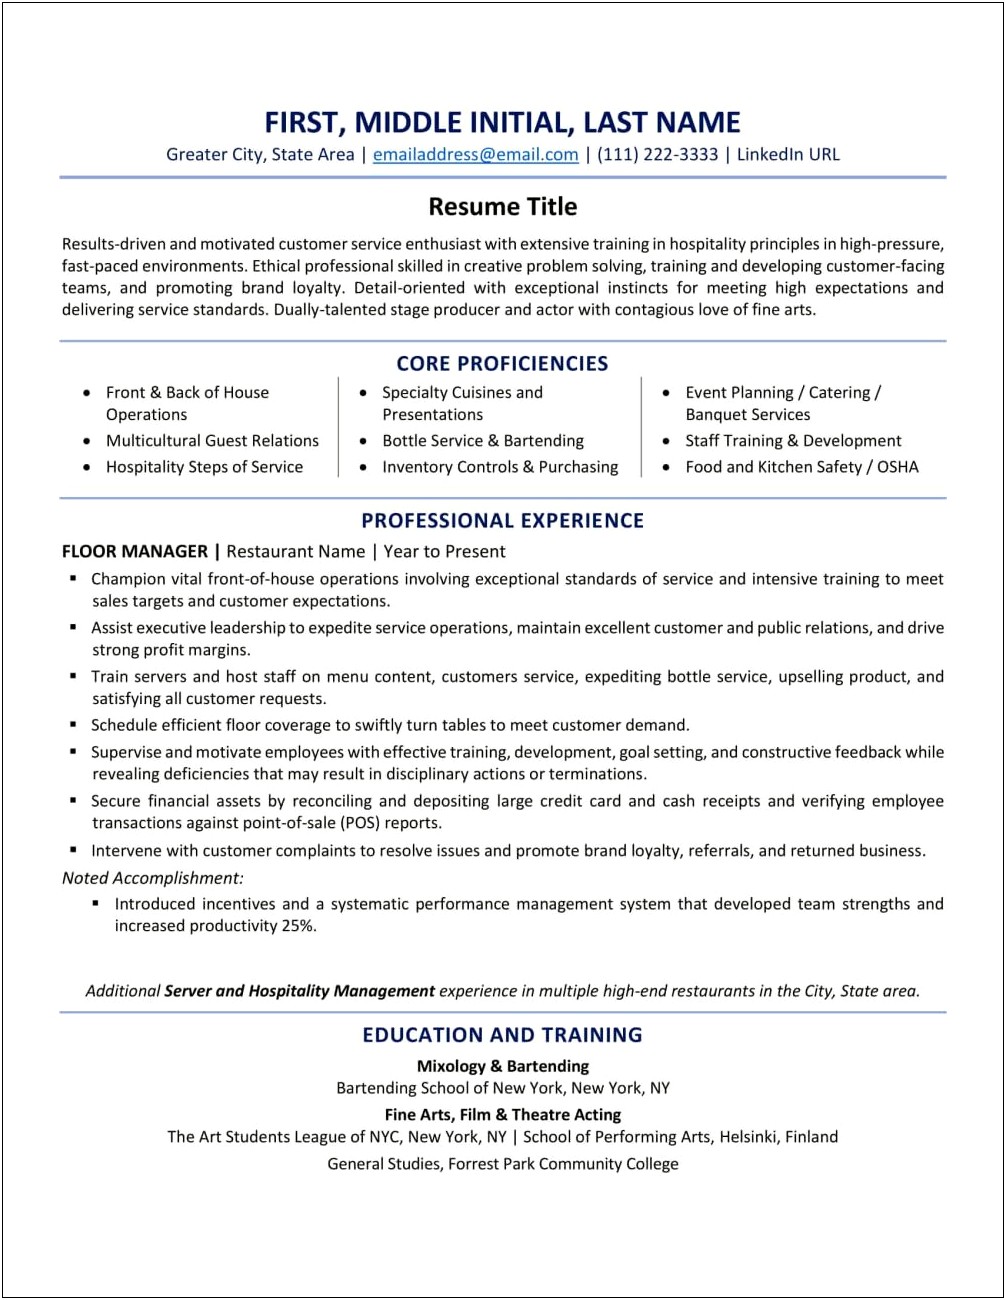 Resume For A Retirement Job After